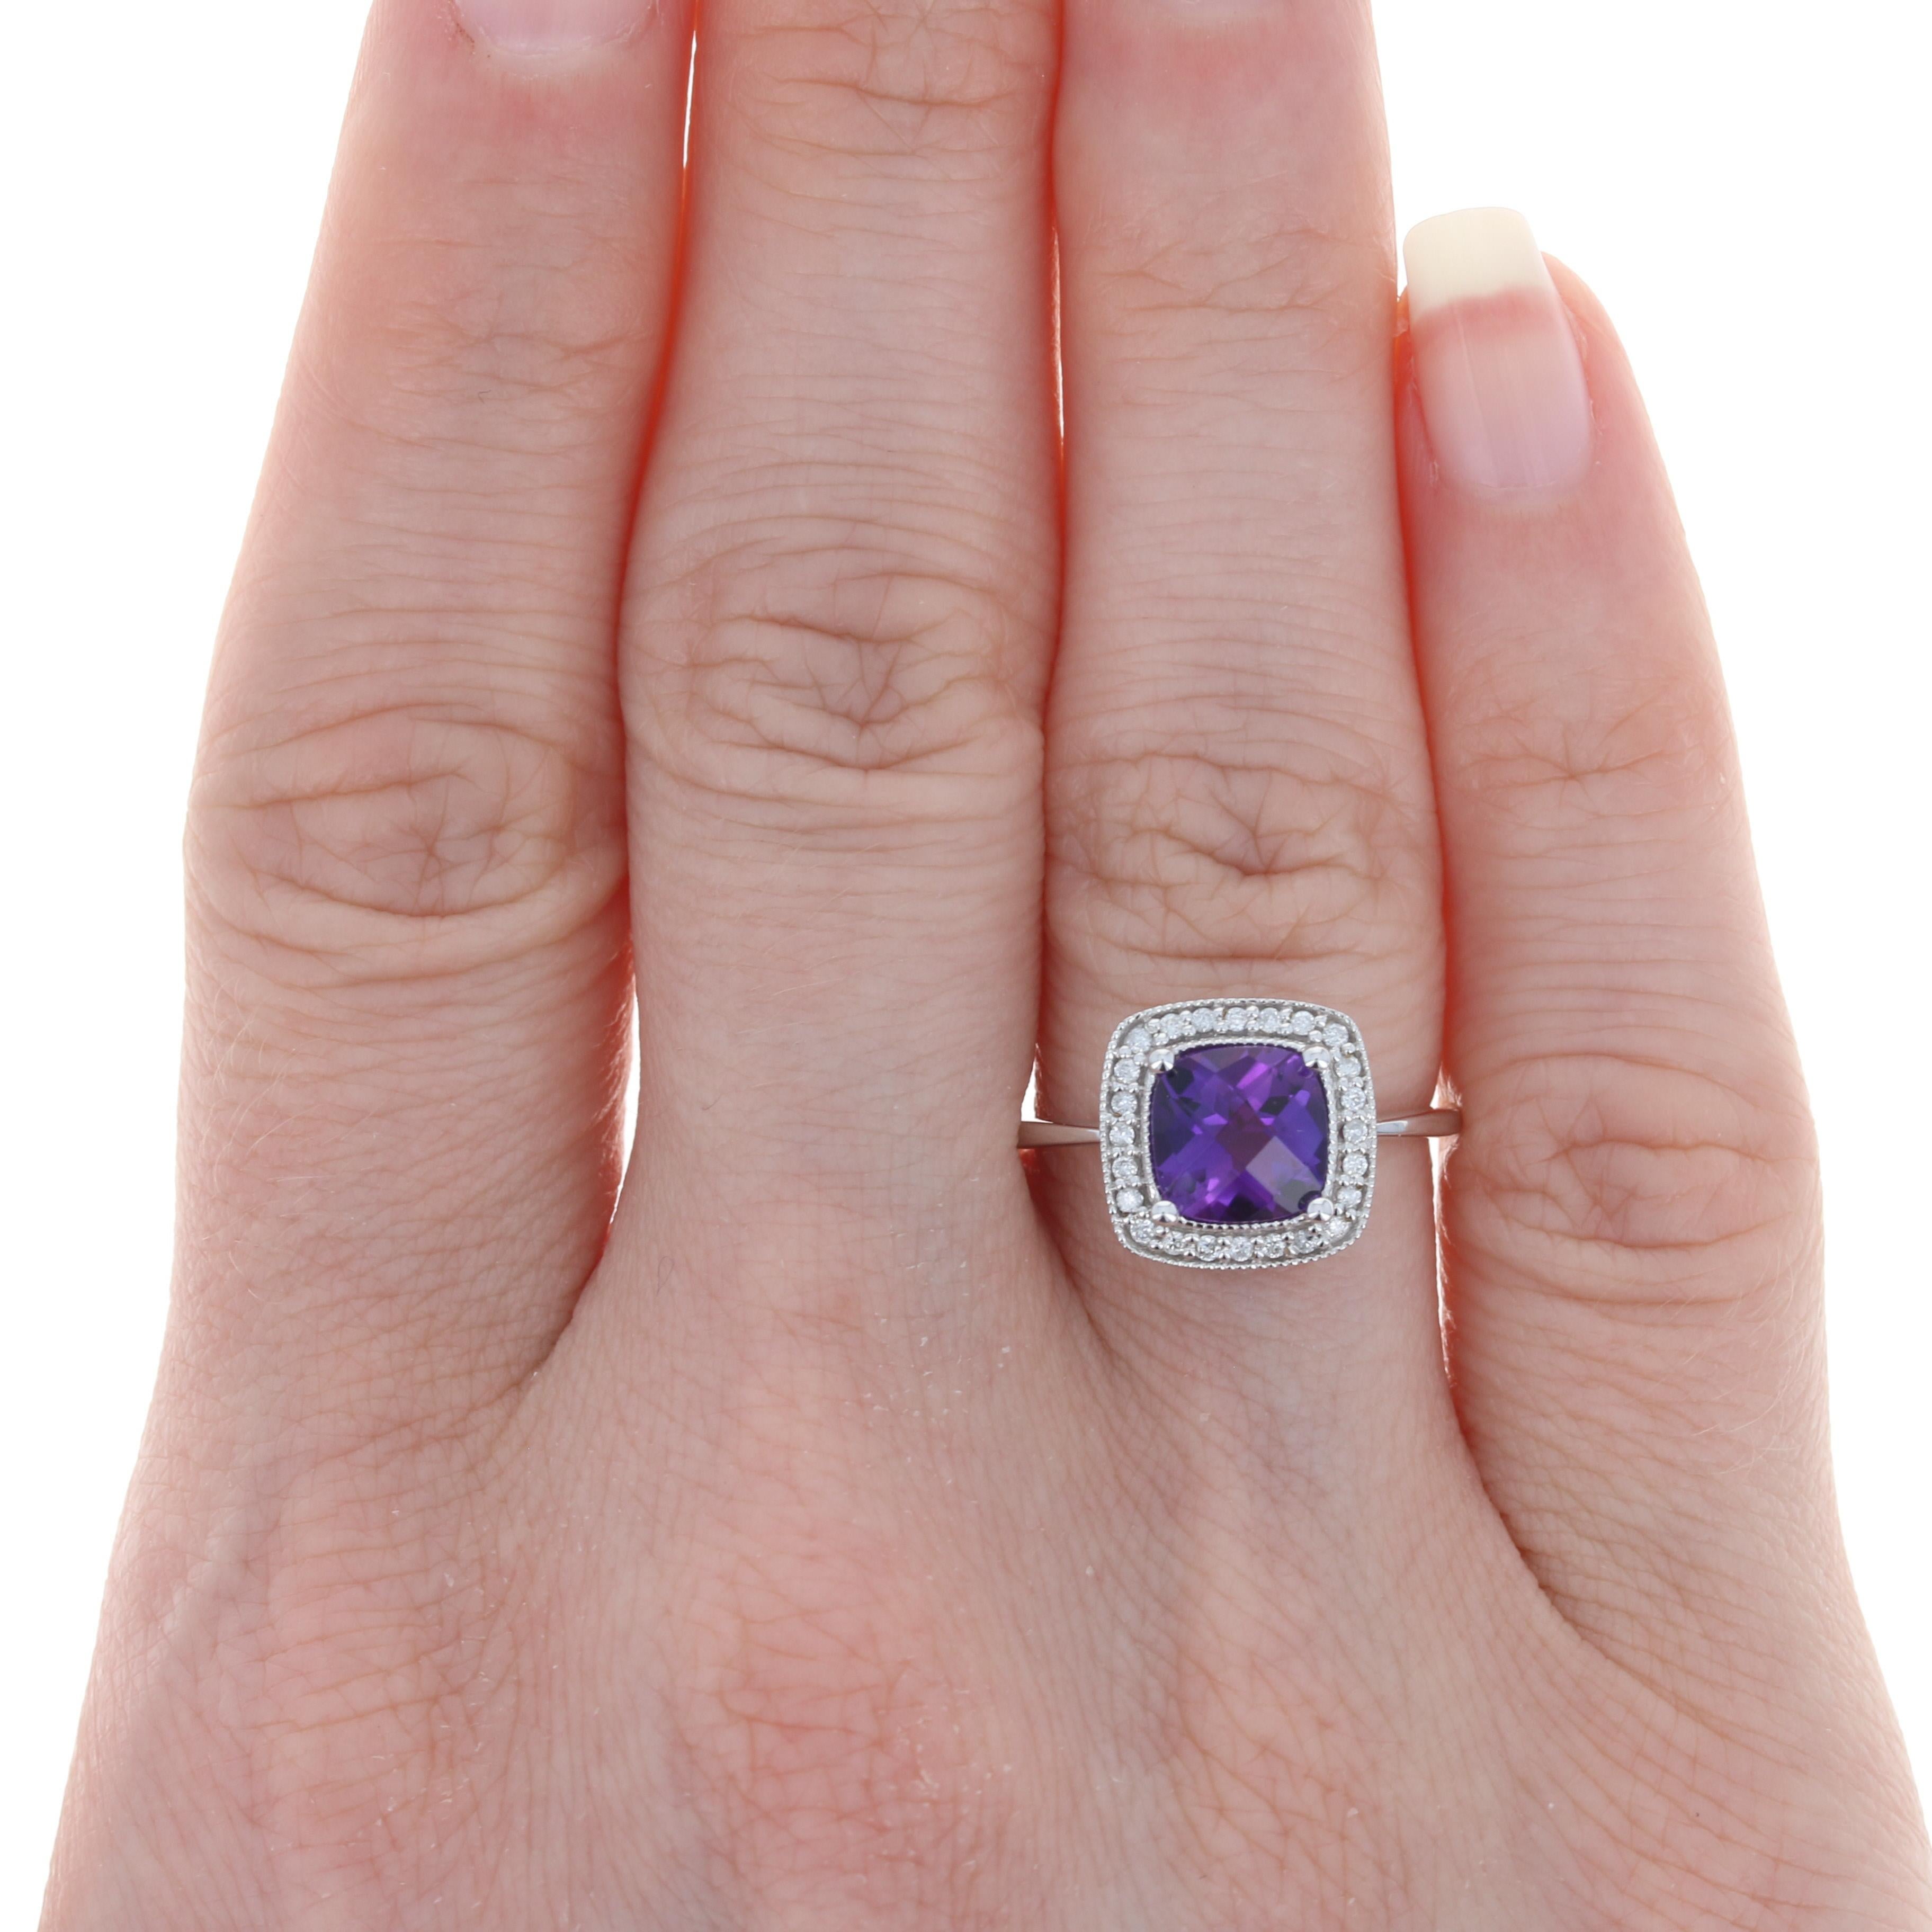 Add a brilliant pop of color to your attire with this gorgeous ring! Fashioned in 10k white gold, this NEW piece showcases a vivacious amethyst solitaire surrounded by a shimmering halo of white diamonds which are outlined by beautiful milgrain